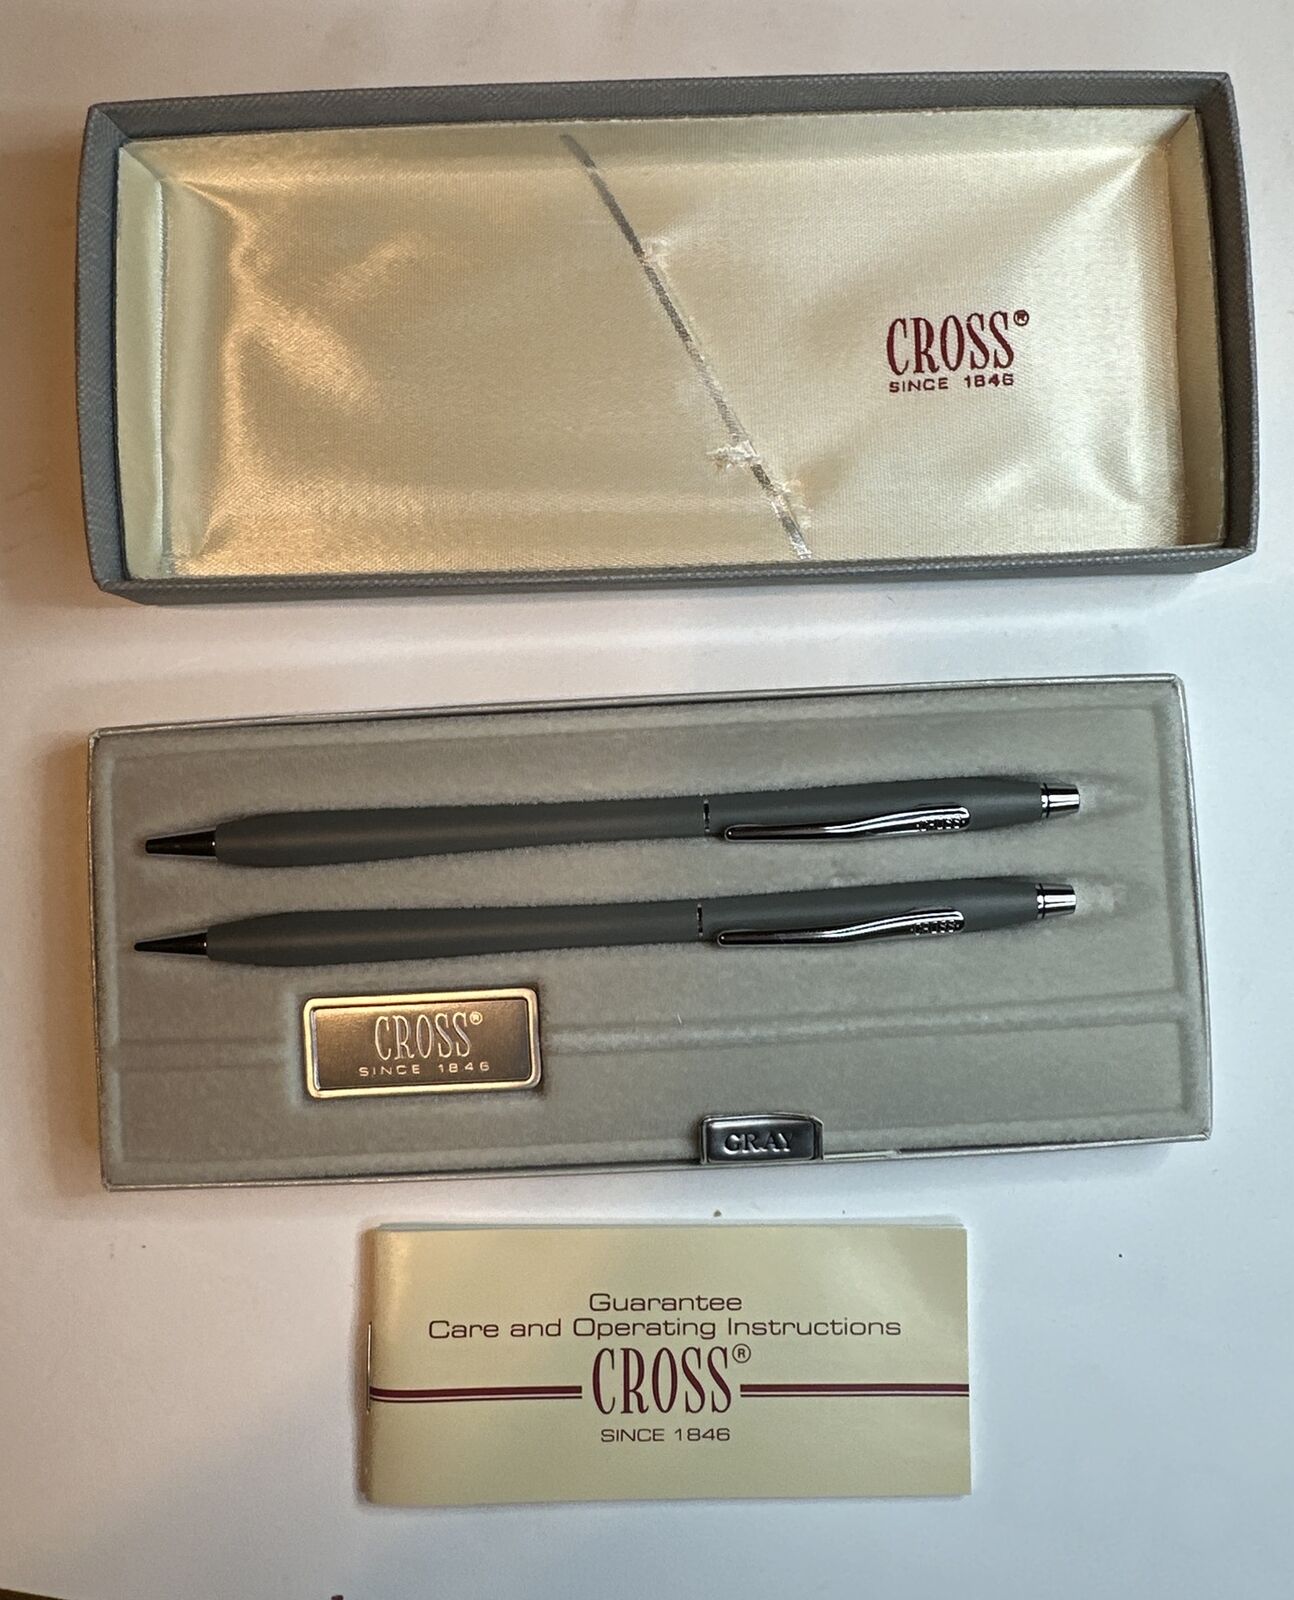 Vintage 1970s Cross Pen and Pencil Set No.2101 in Gray Org Box & Manual